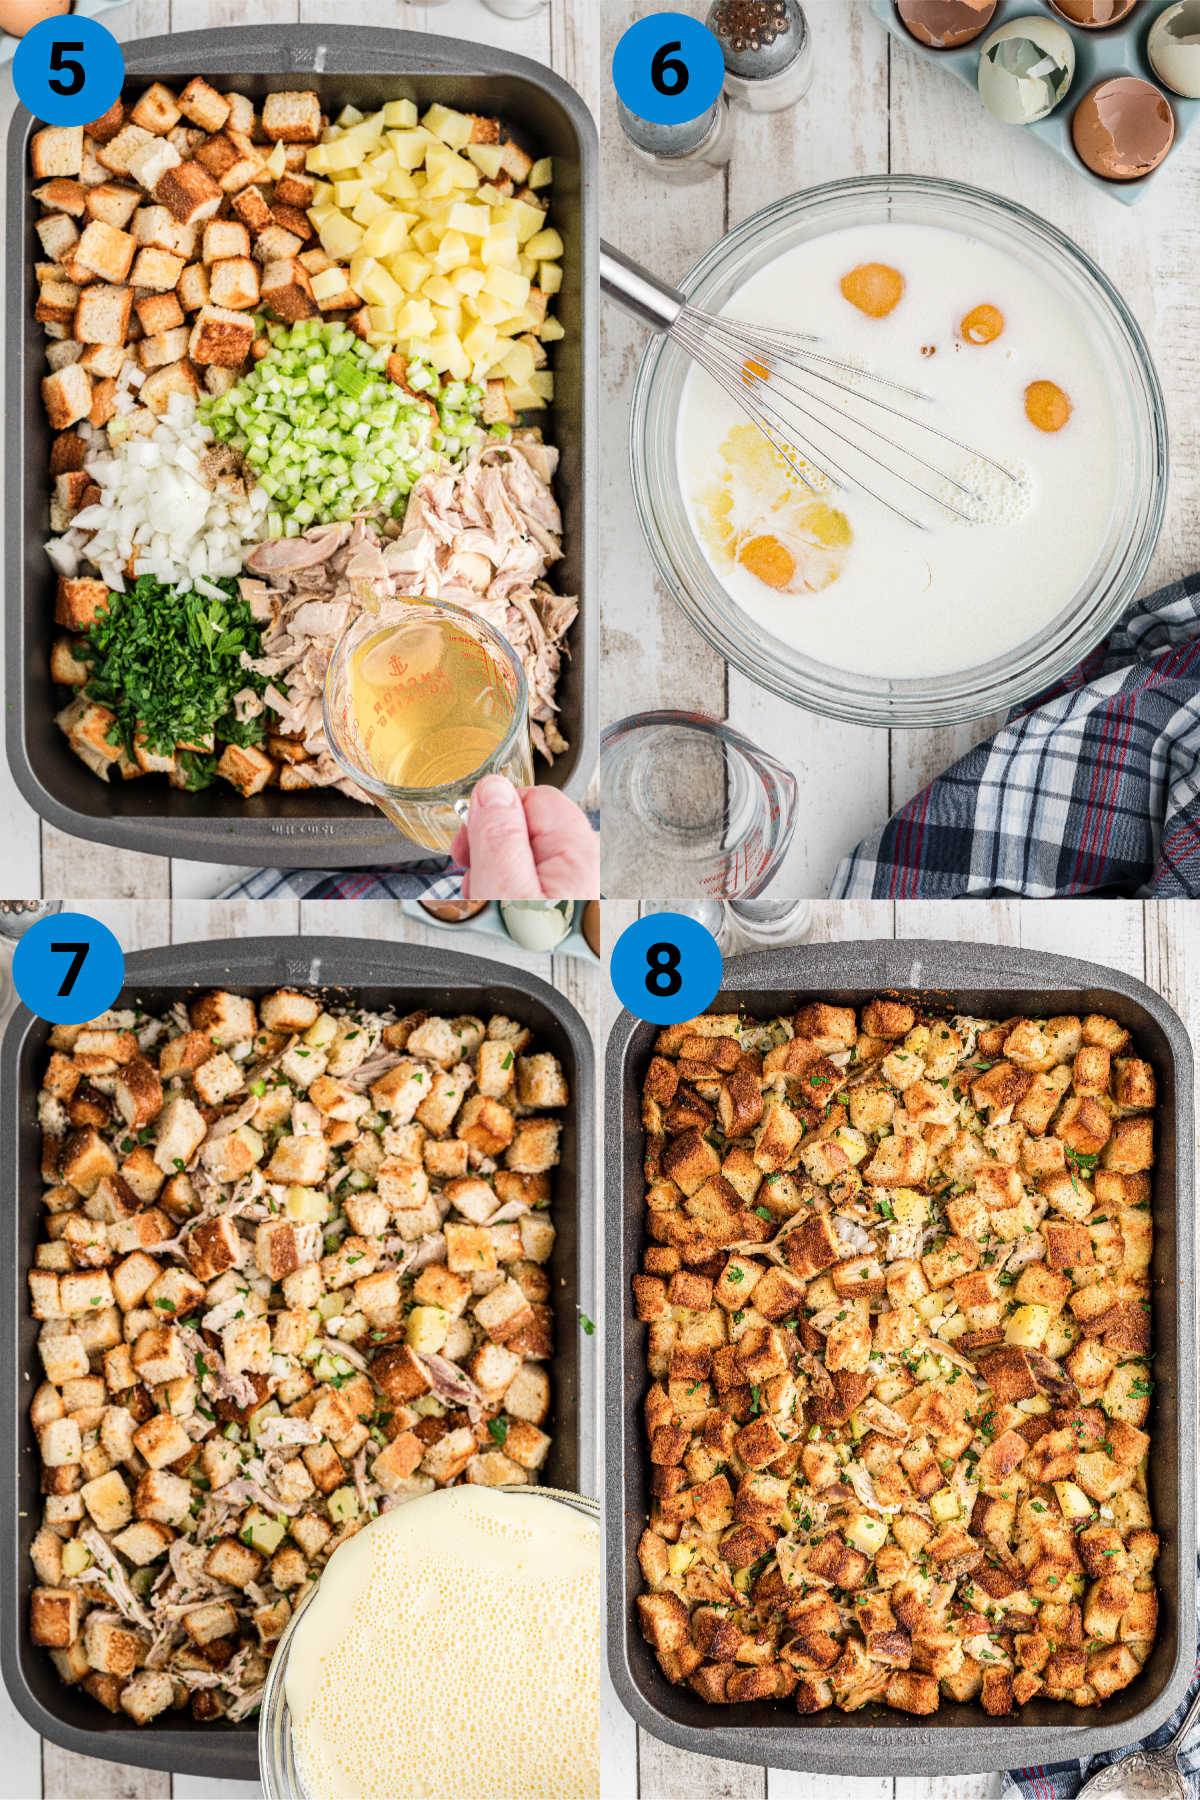 A collage of four images showing how to make Amish Turkey Stuffing, steps 5-8.